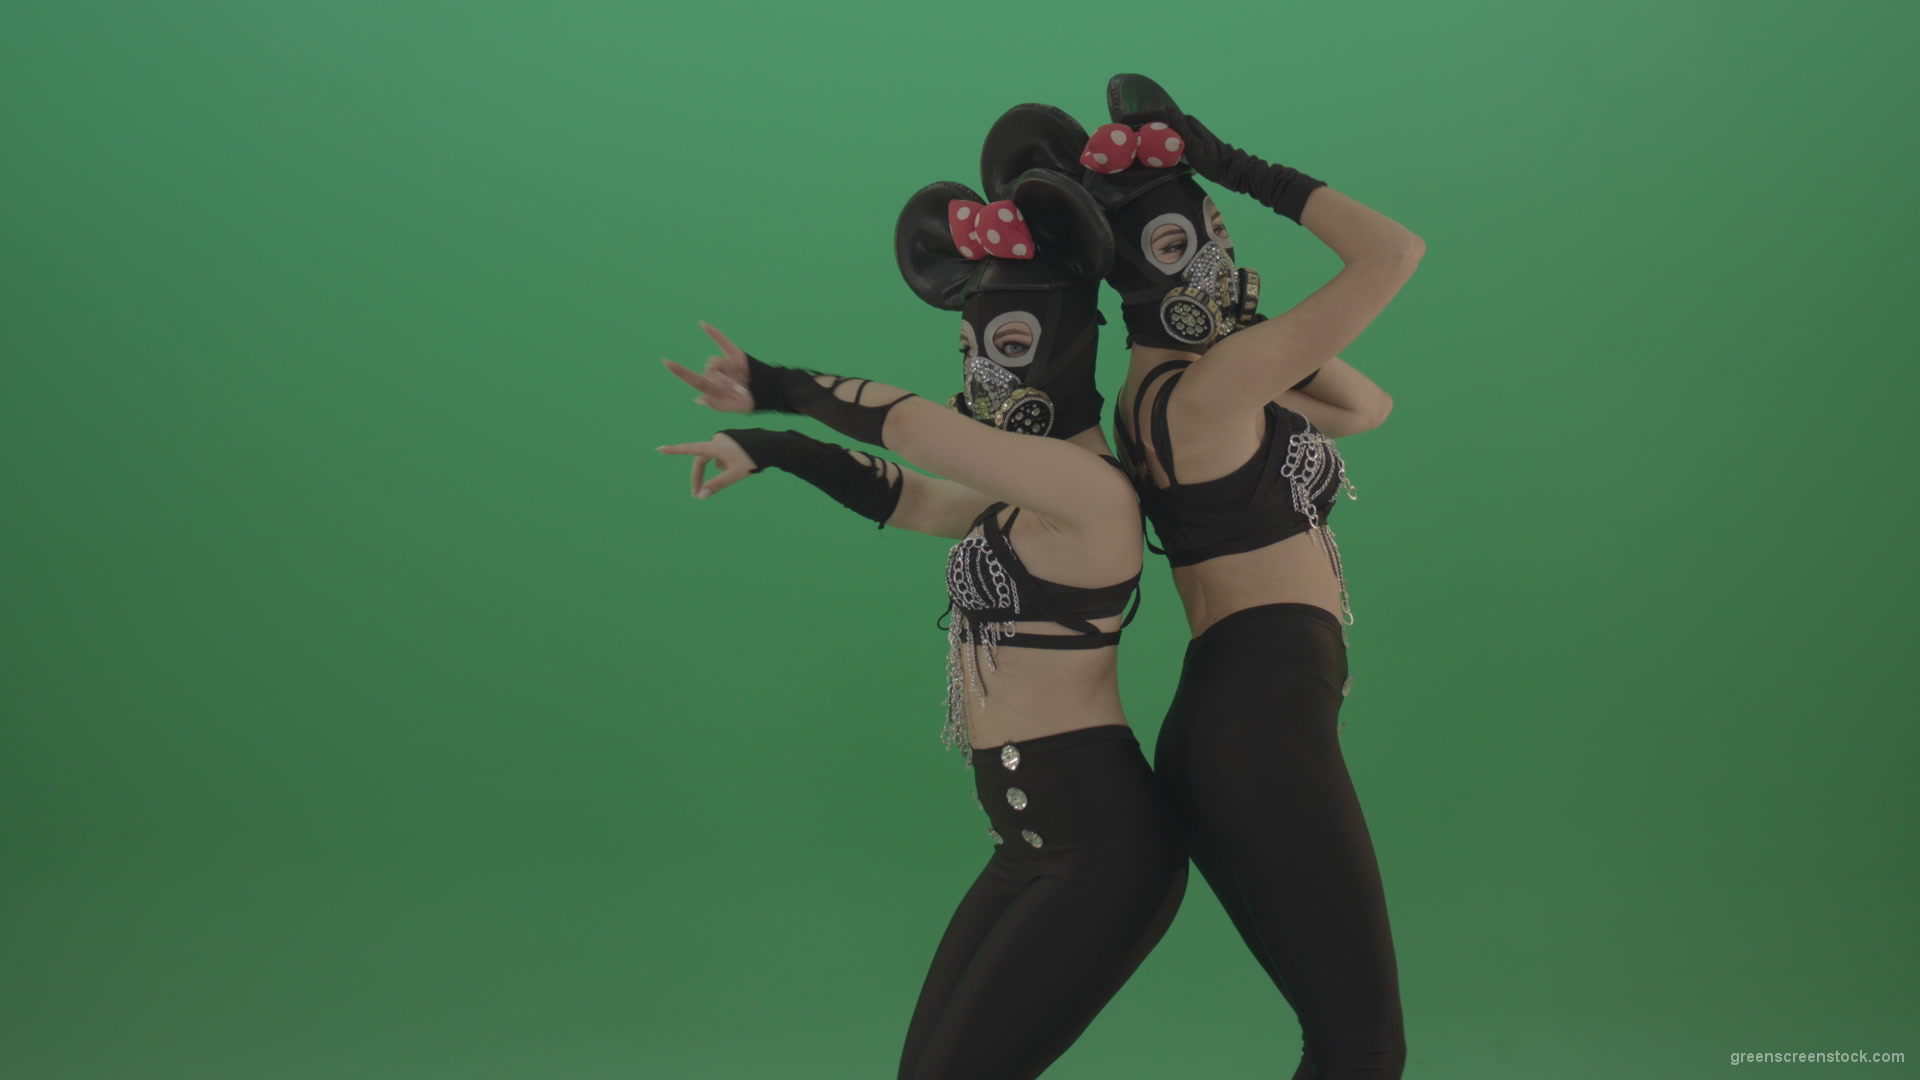 Girls-dressed-Mickey-Mouse-dance-well-on-green-screen_002 Green Screen Stock